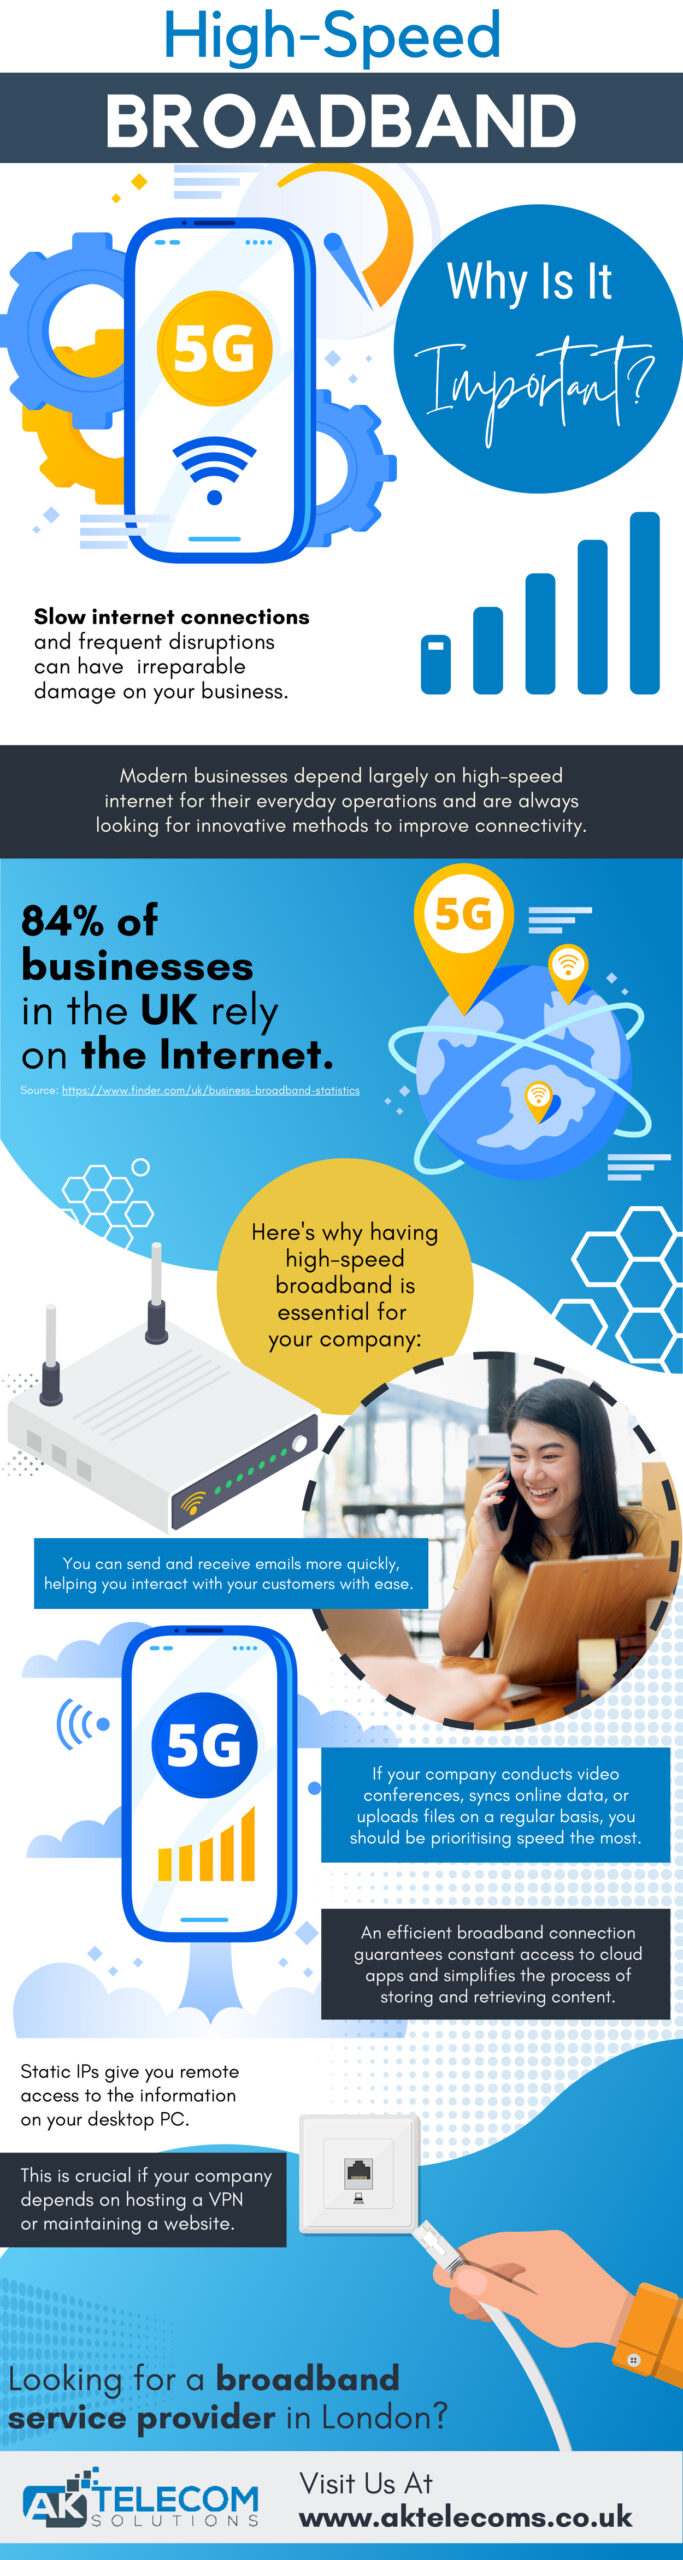 Modern businesses depend largely on high-speed internet for their everyday operations and are always looking for innovative methods to improve connectivity. Here's why high-speed broadband is important:   